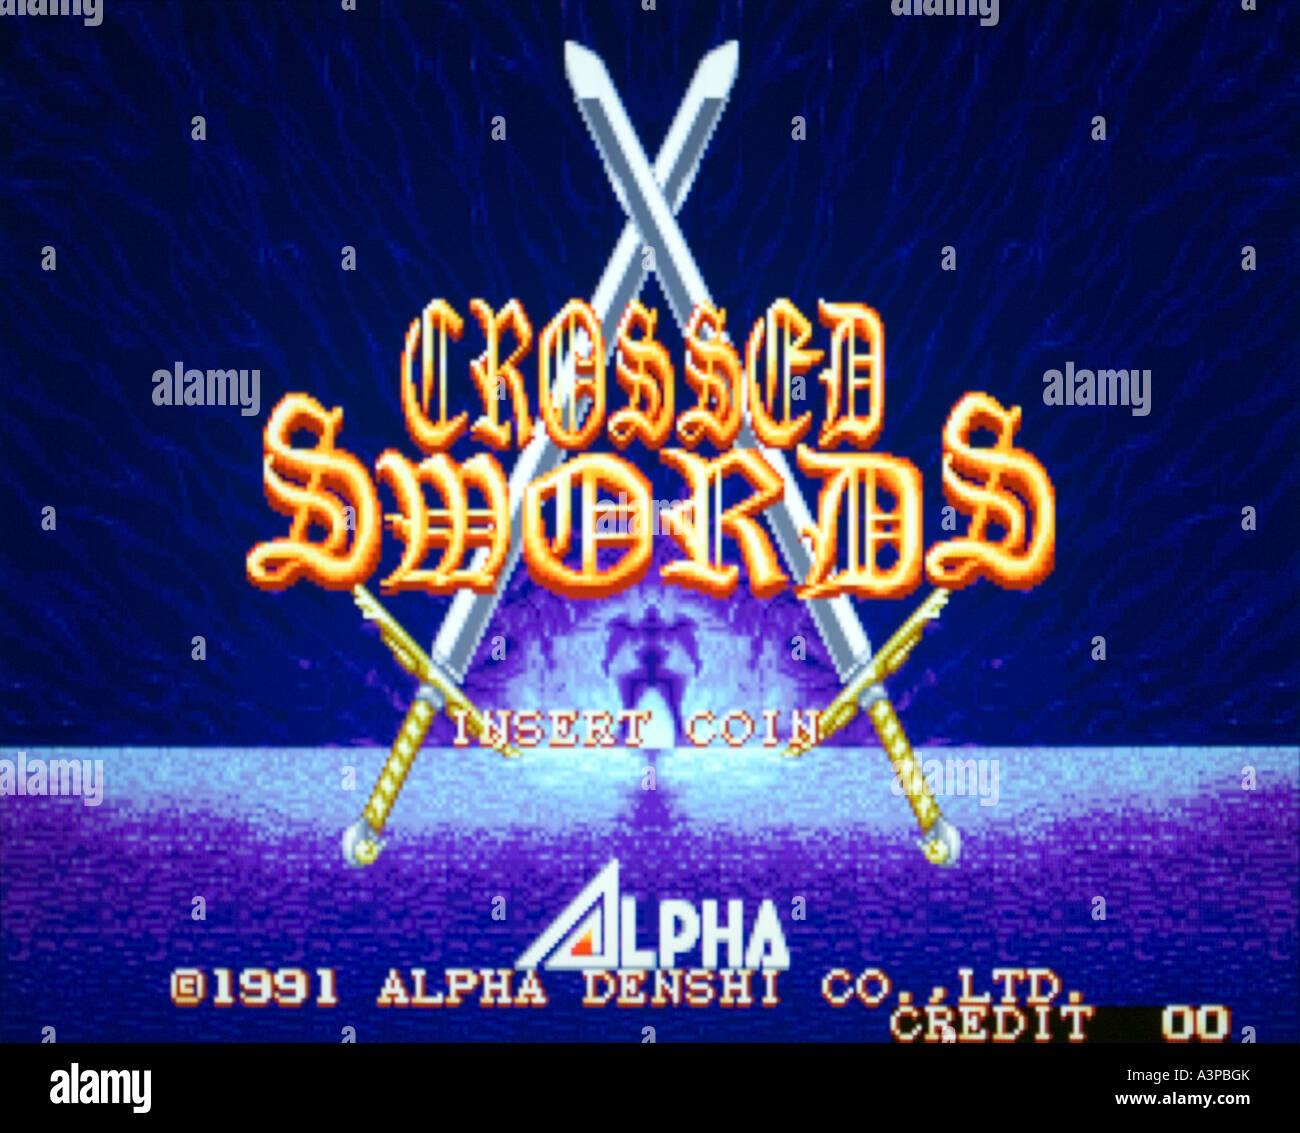 Play Arcade Crossed Swords (ALM-002)(ALH-002) Online in your